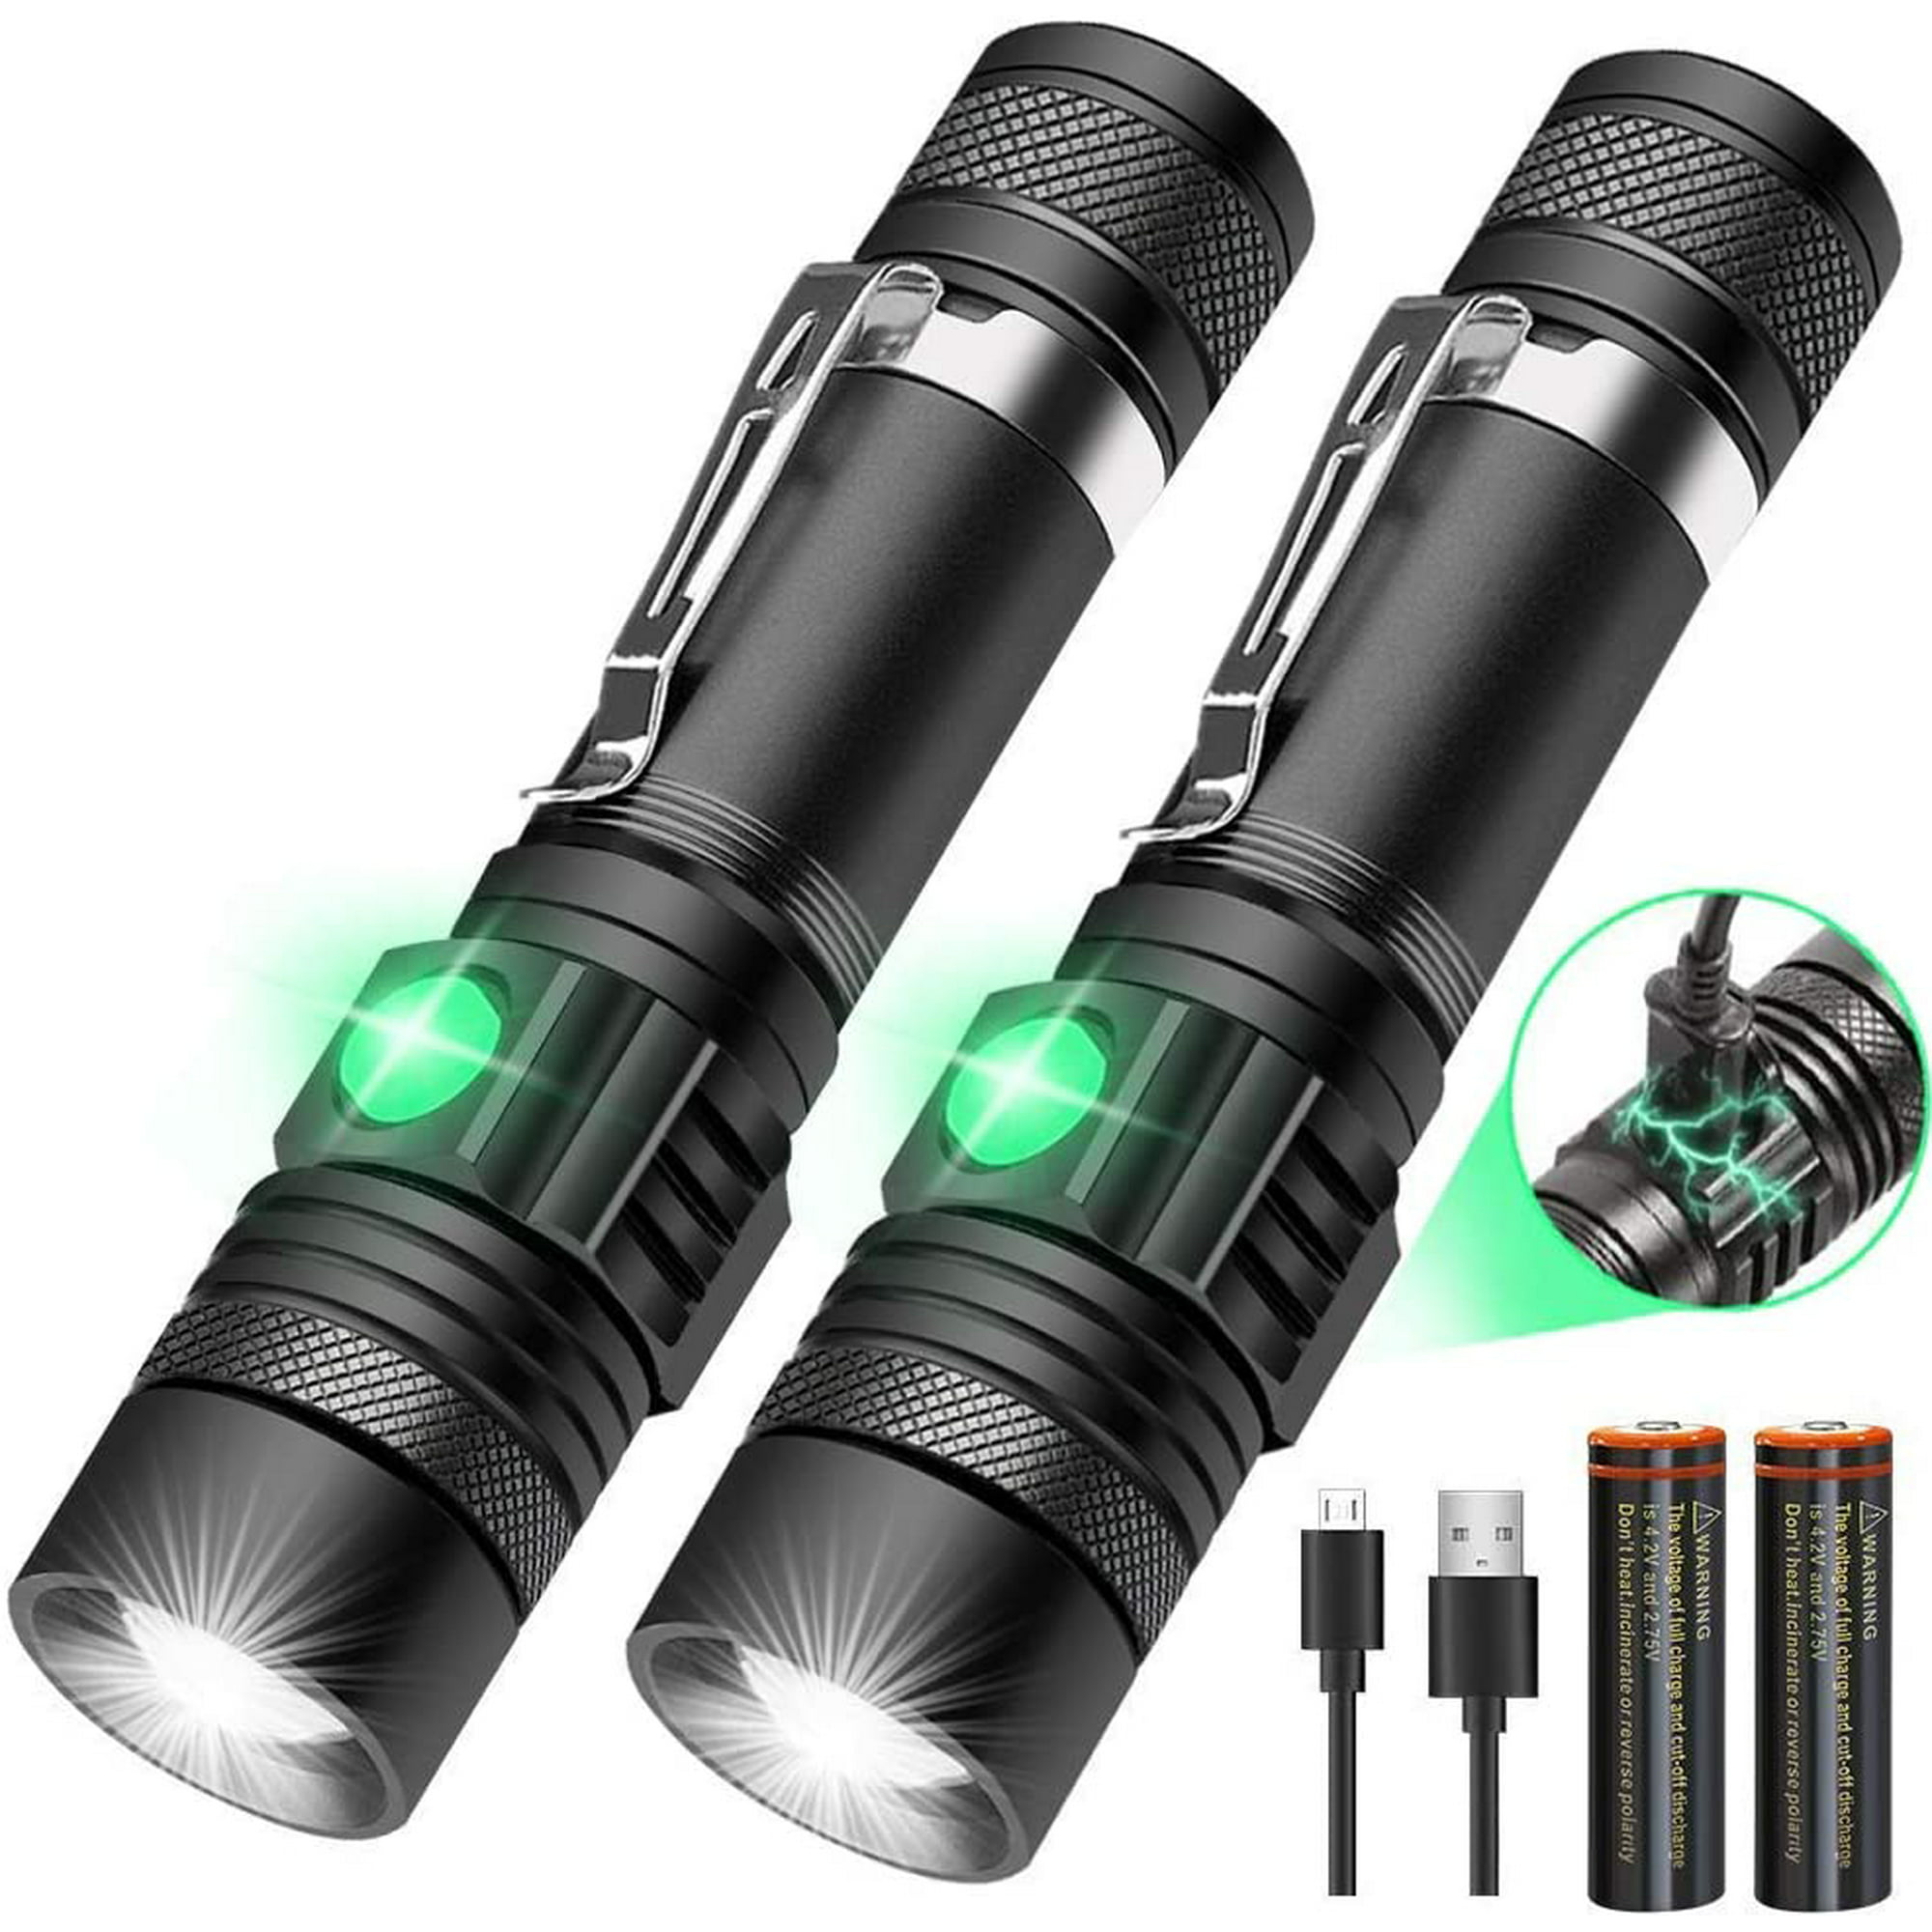 Led Tactical Flashlight Rechargeable, What Is The Brightest Led Flashlight On Market